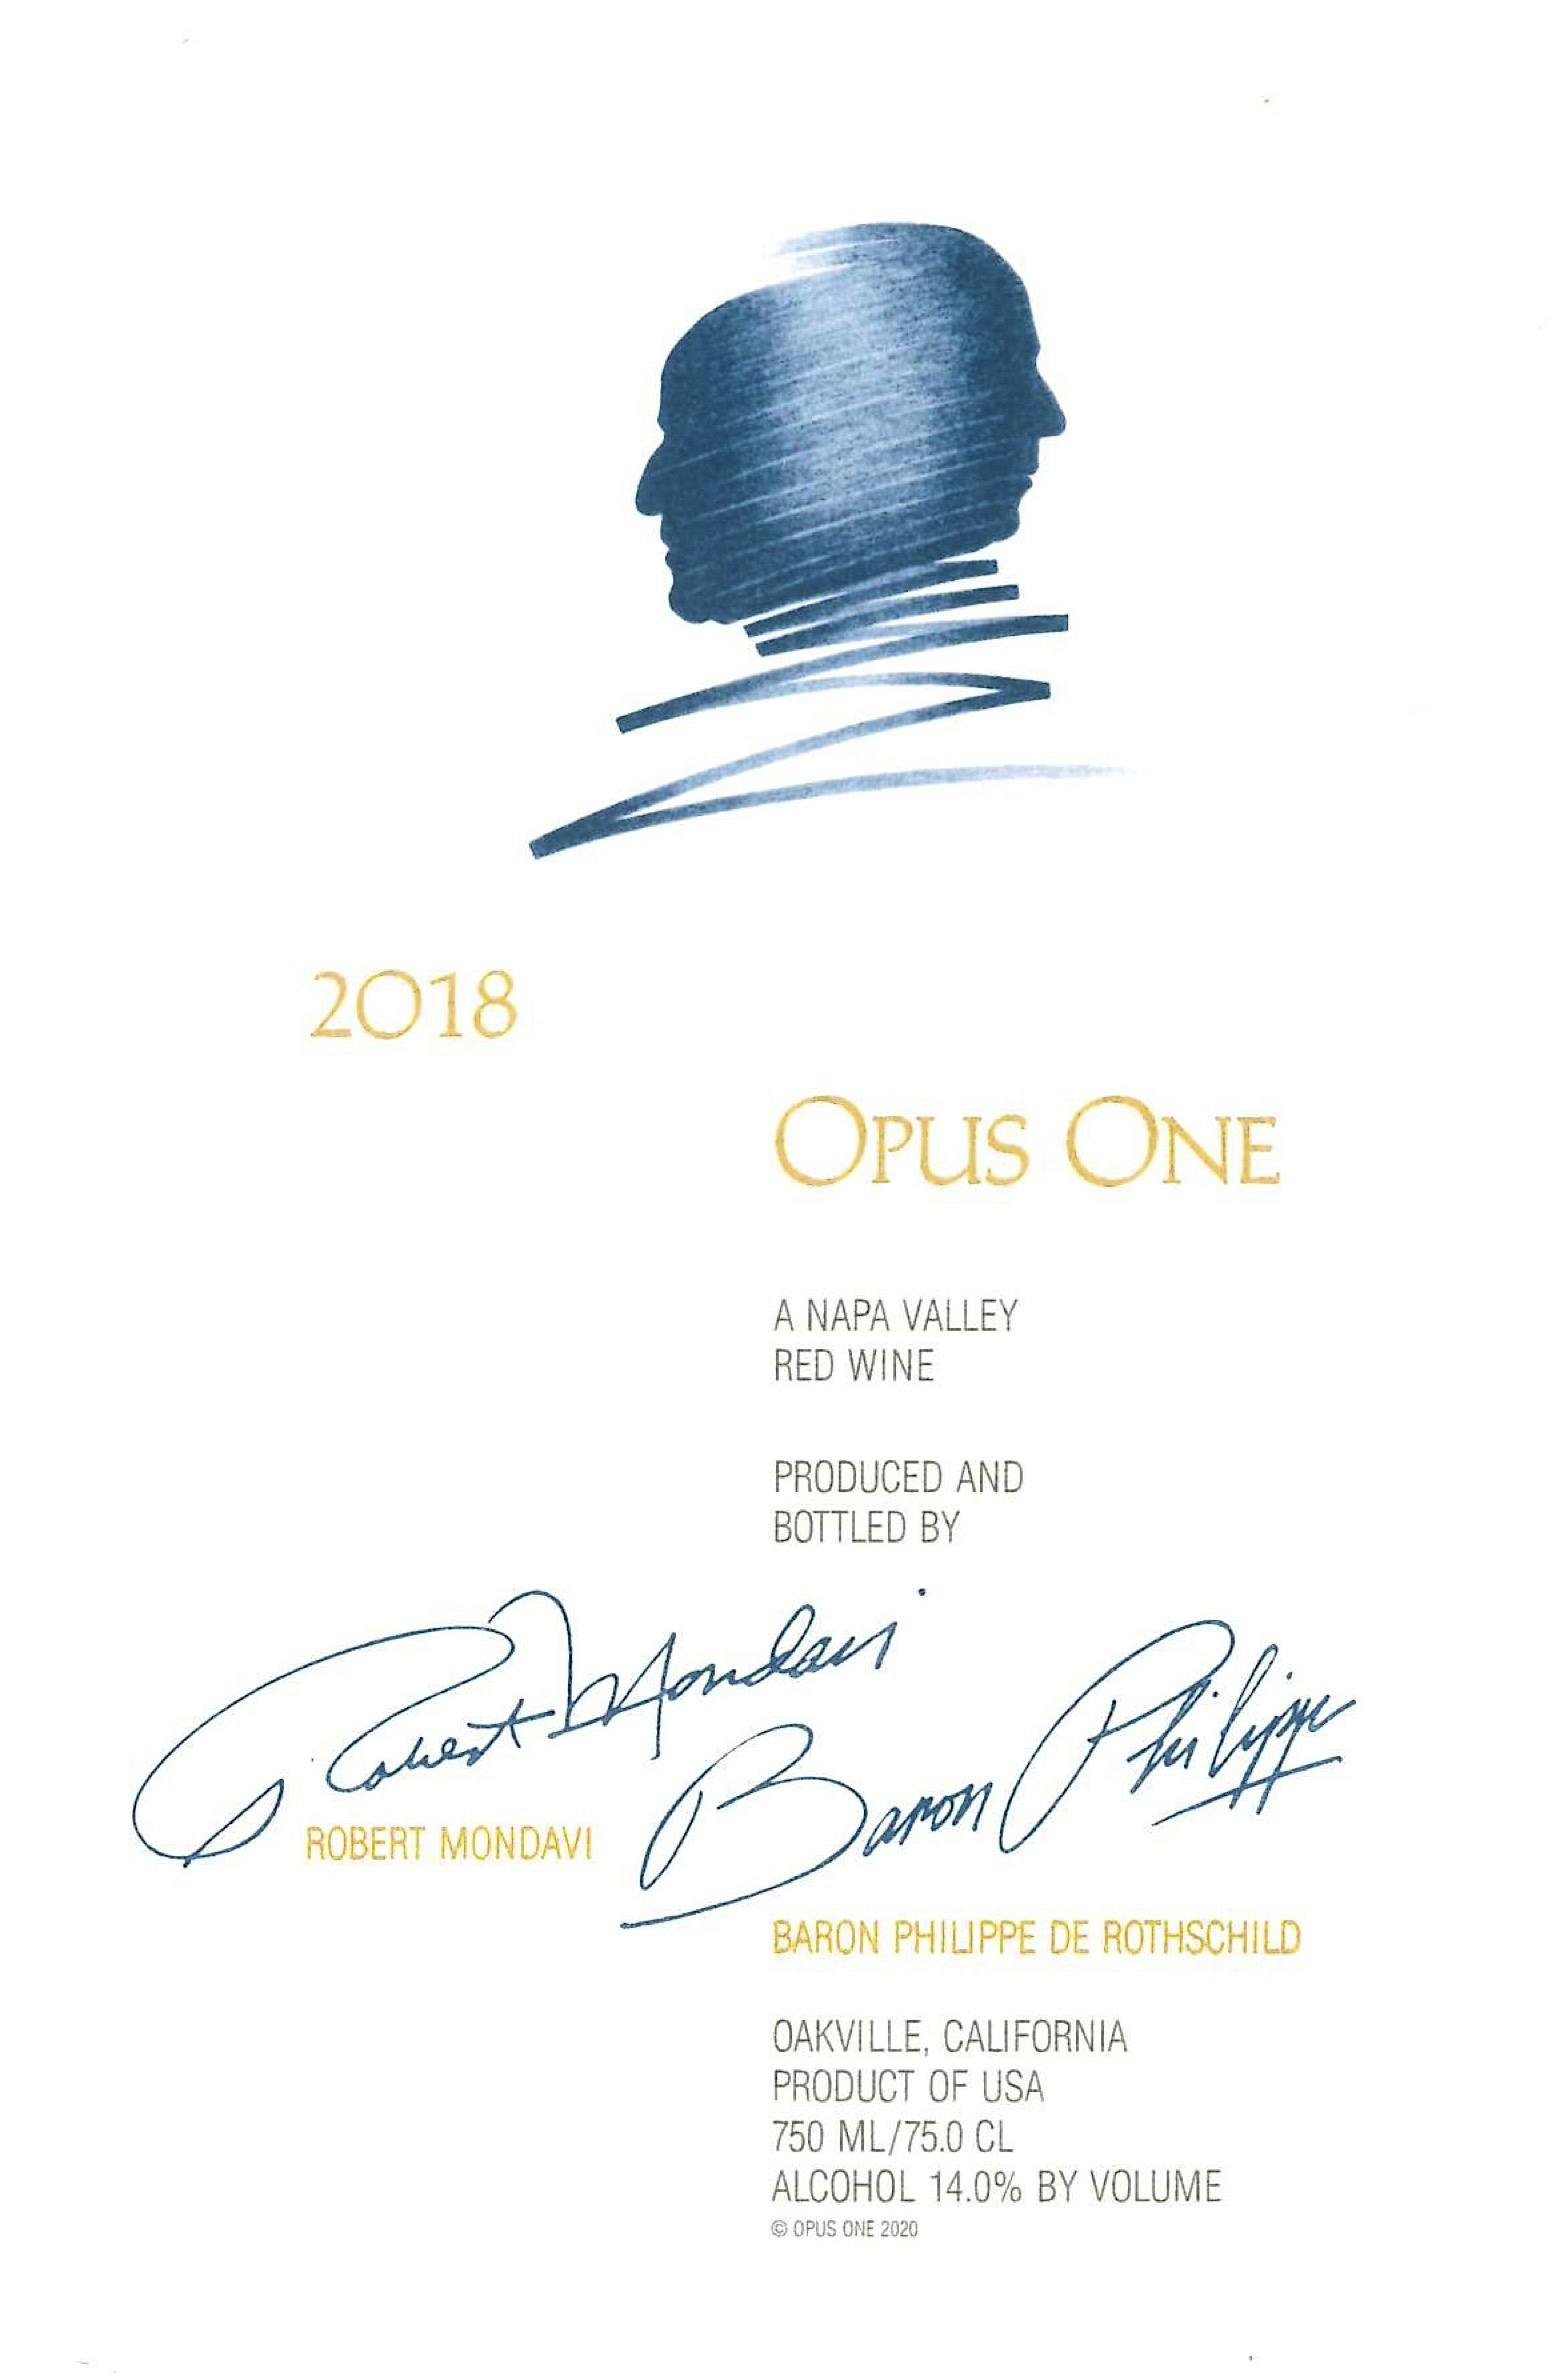 Label for Opus One